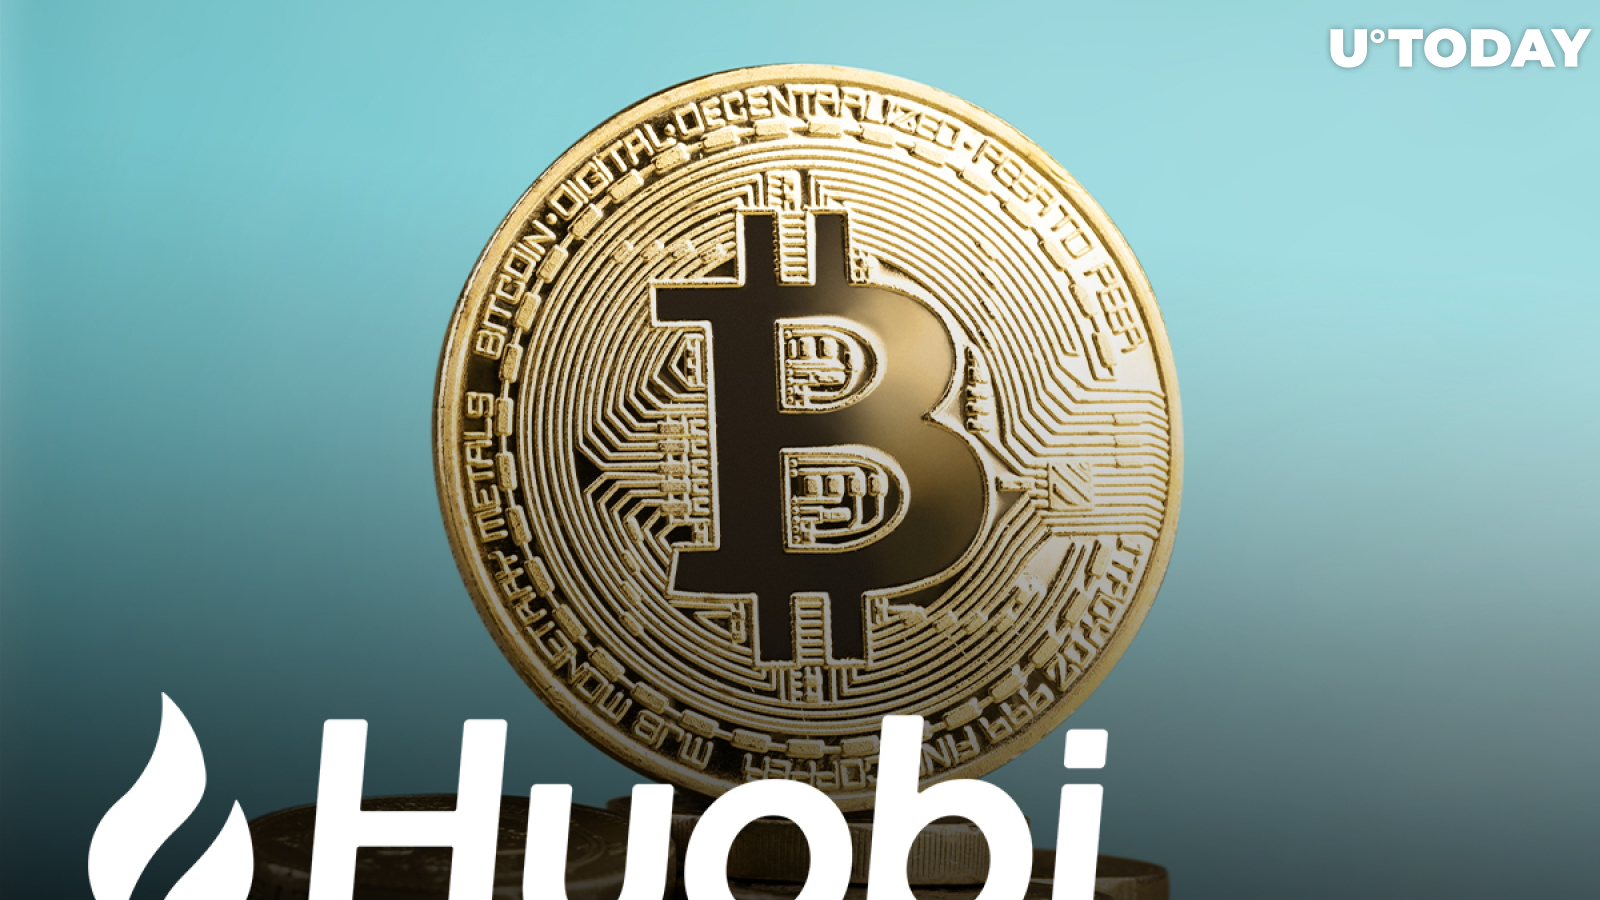 100,000 Bitcoin Shifted by Huobi Miners After Chinese Ban, Possibly to Cover Huobi Client Withdrawals